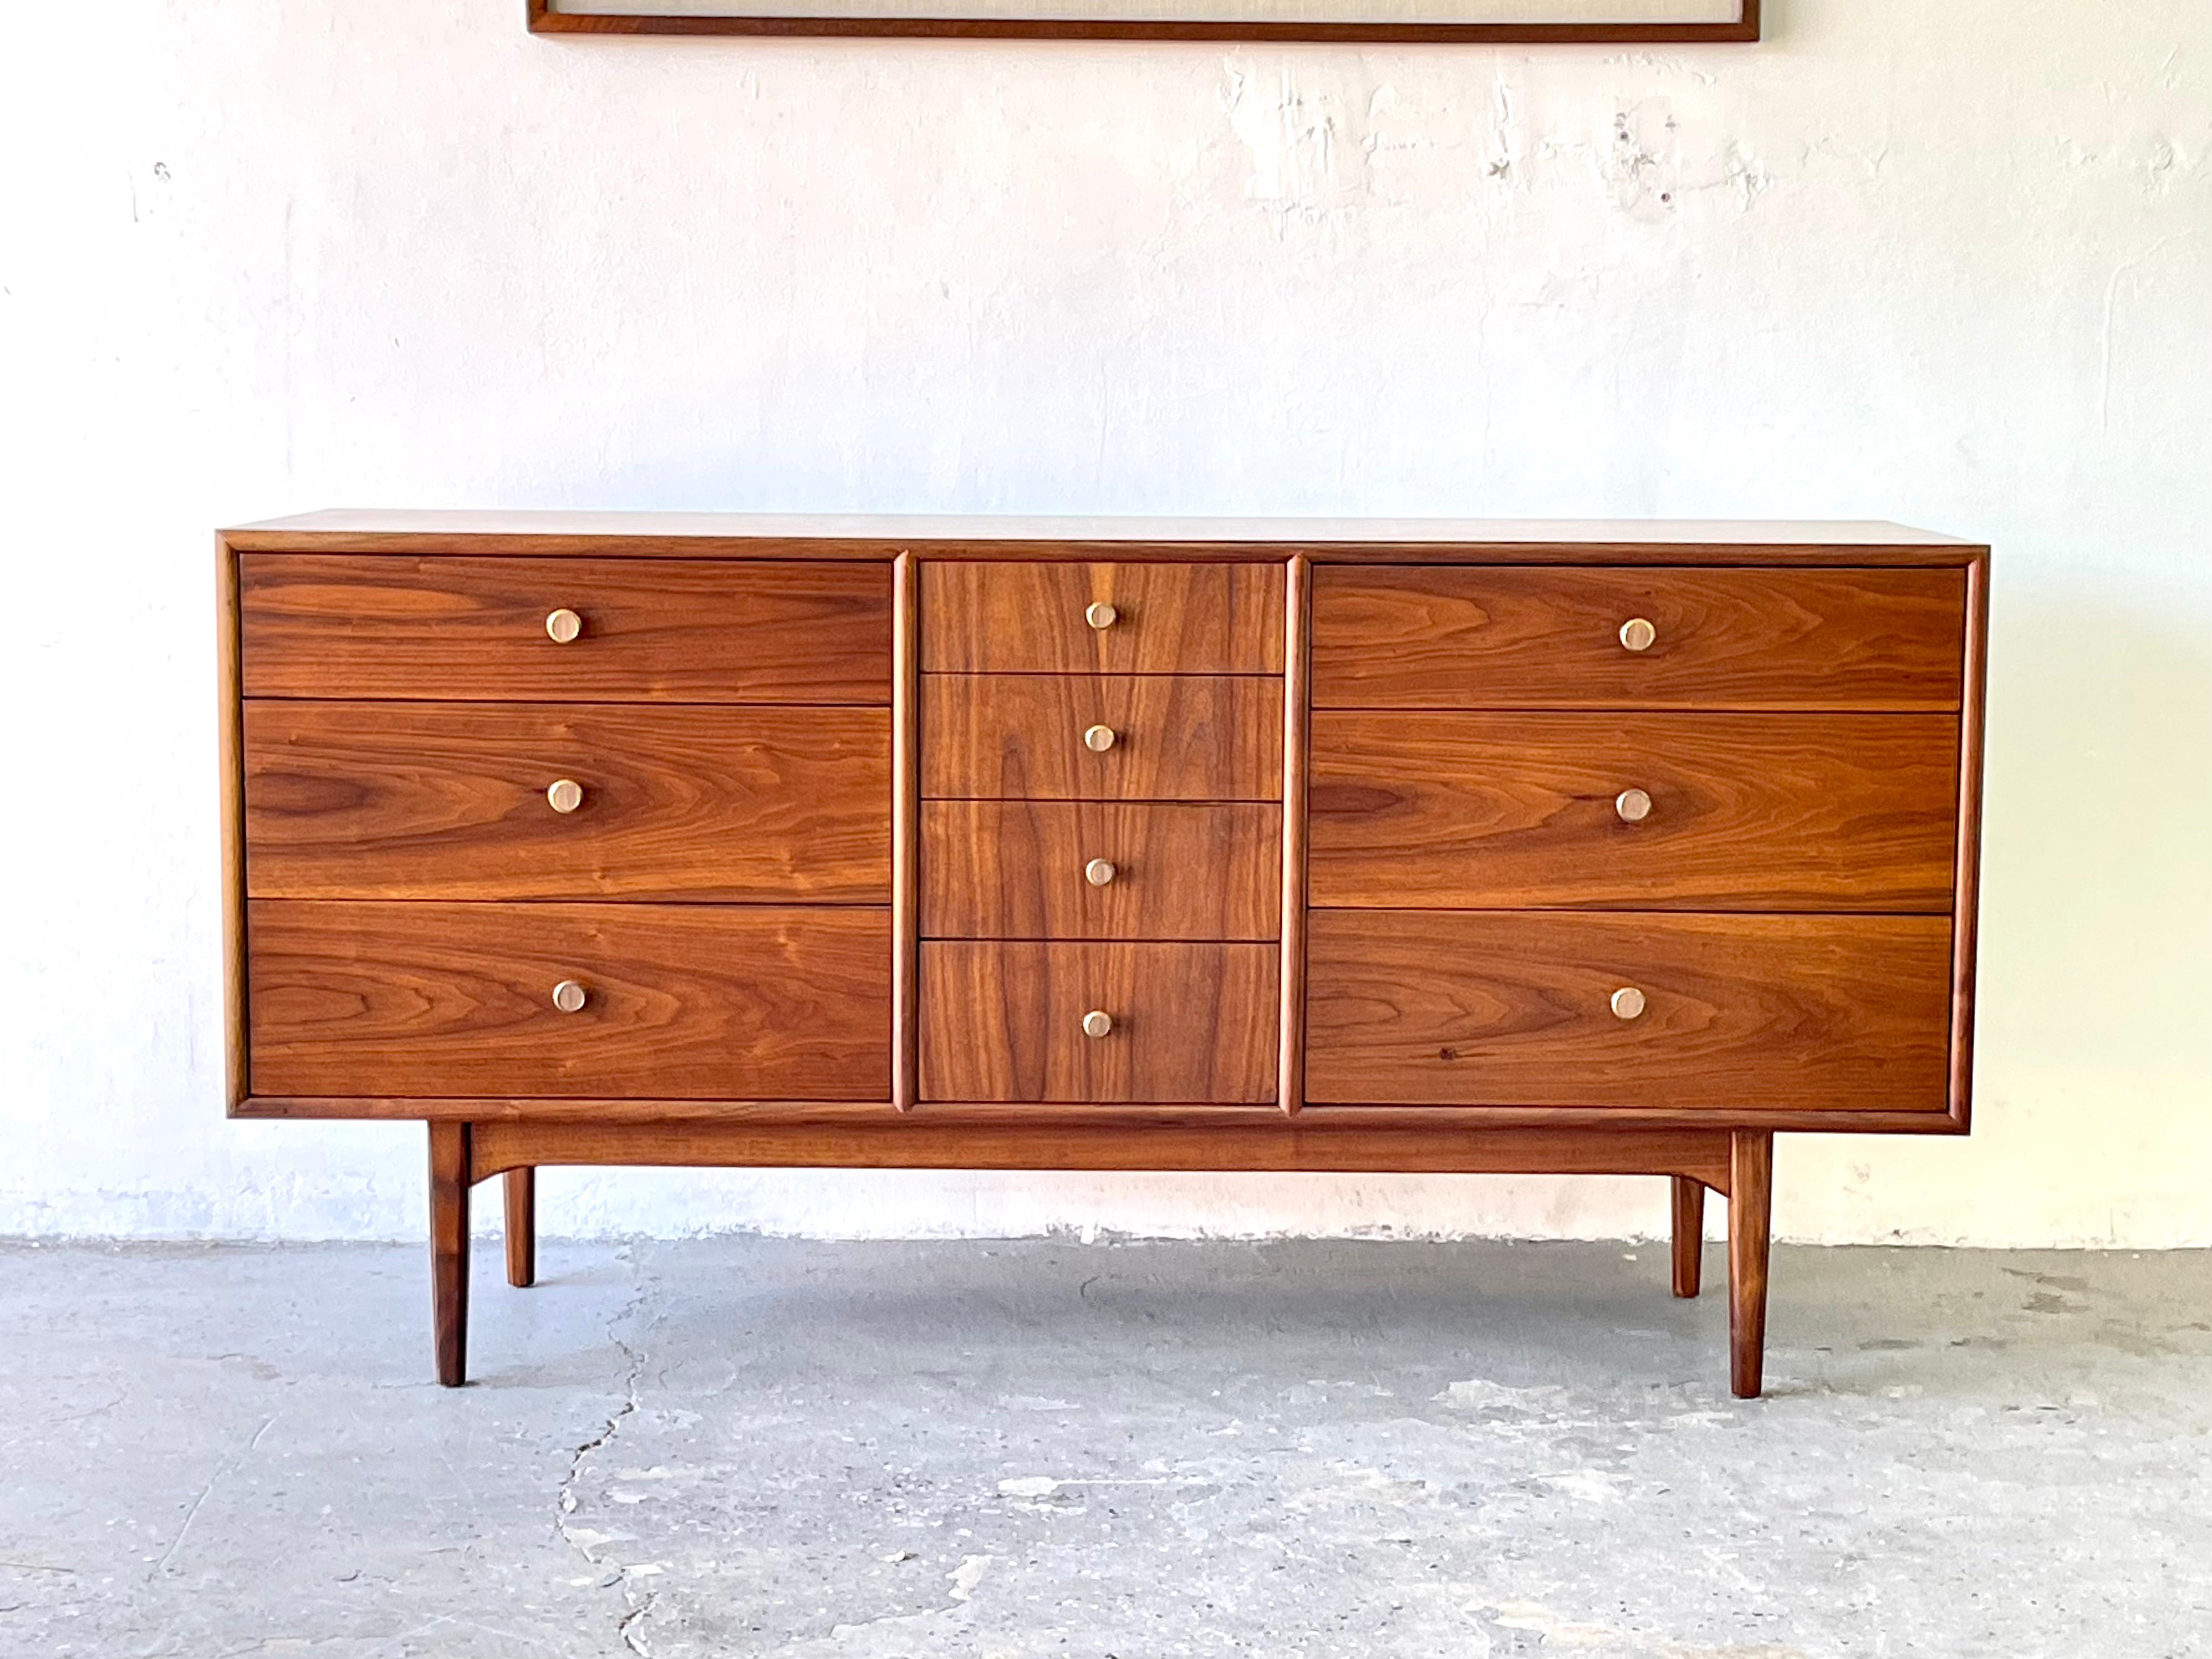 Mid-Century Modern walnut dresser designed by Kipp Stewart and Stewart McDougall for Drexel's Declaration collection. Exceptional quality dresser constructed from walnut. Features ten dovetailed drawers with original brass pulls. Featuring four